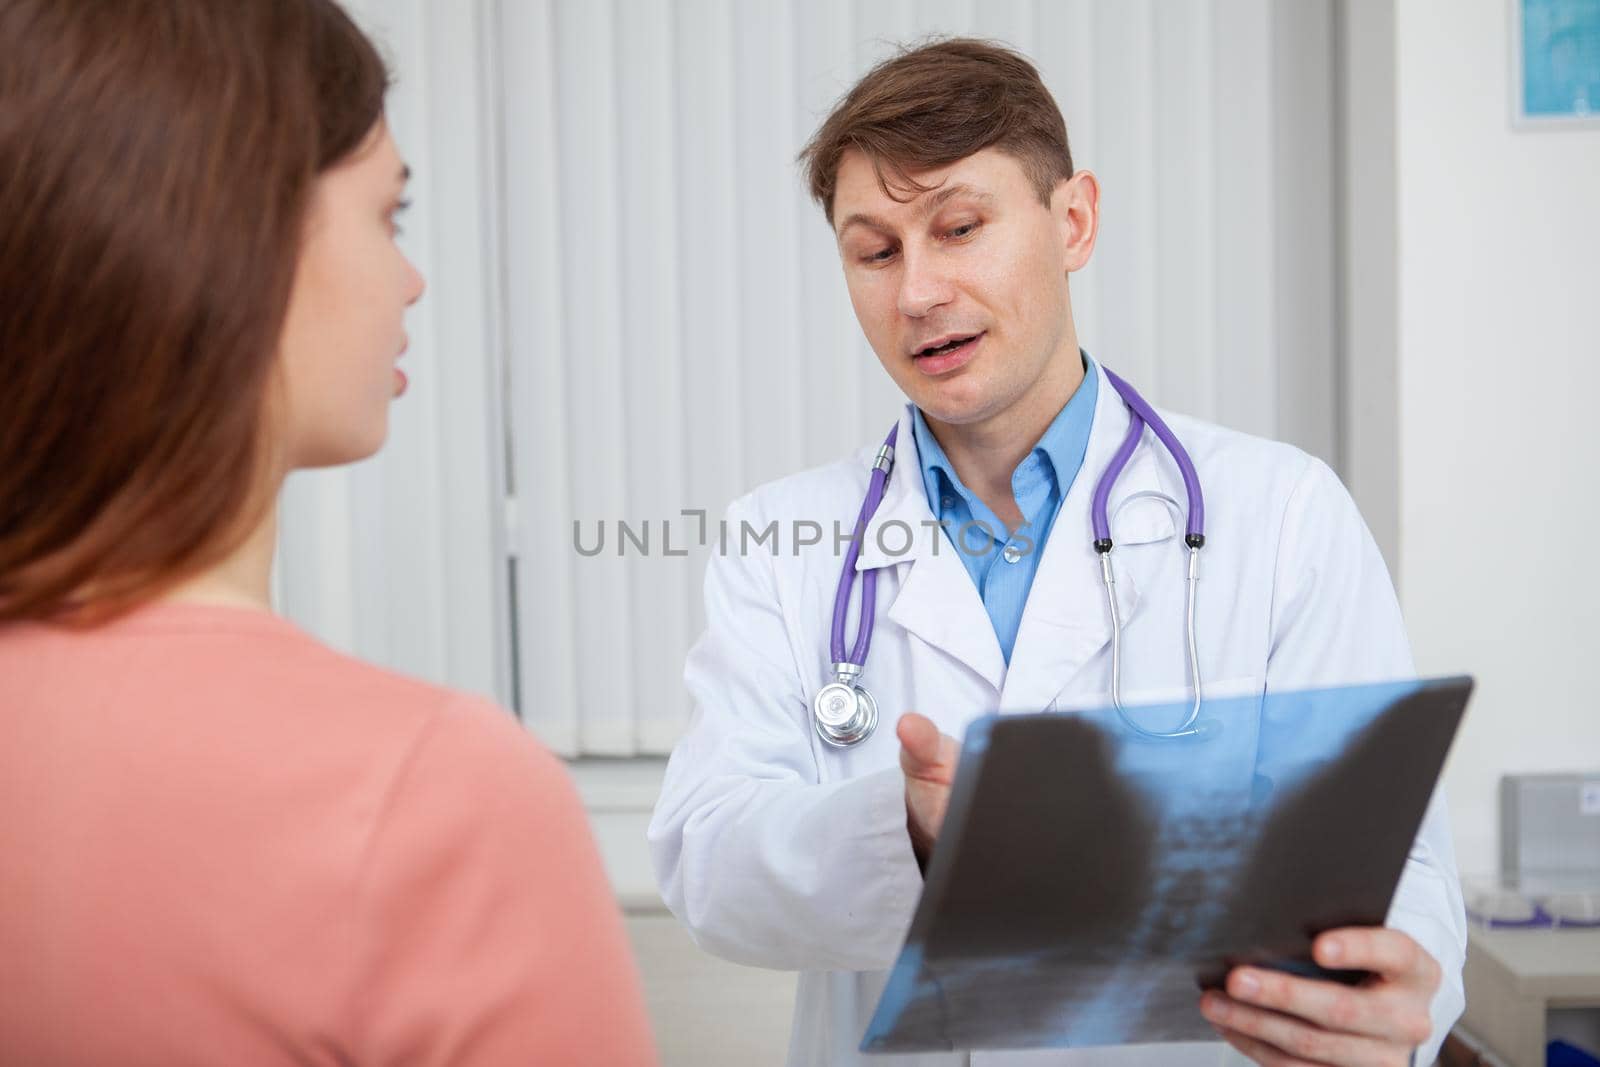 Experienced male doctor explaining x-ray scanning results to his female patient, working at his office